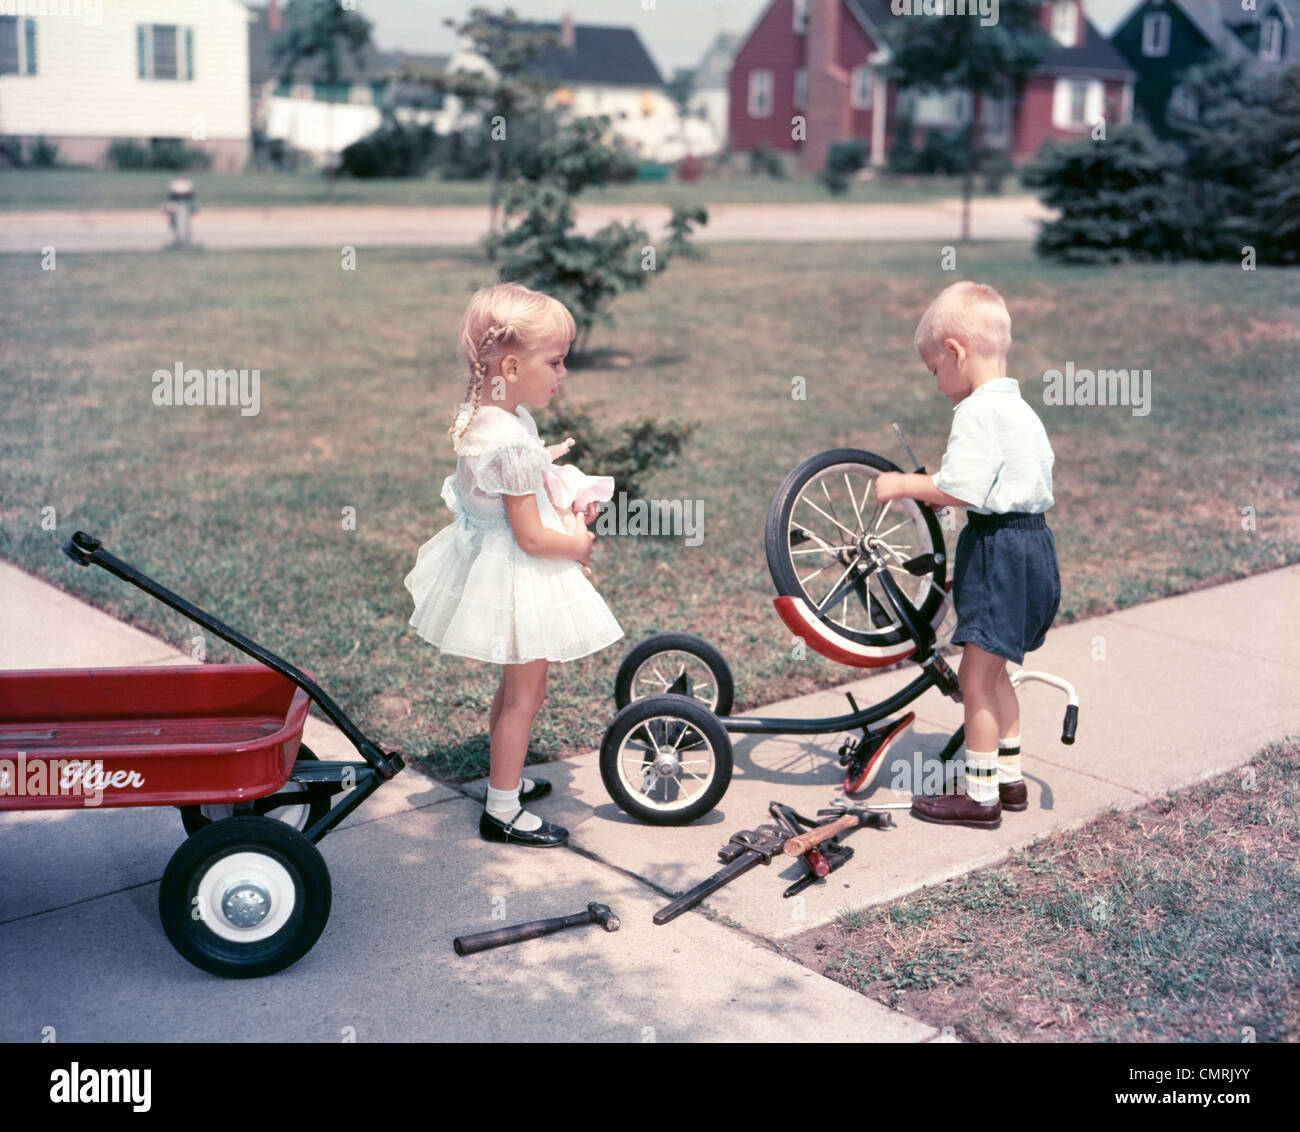 LITTLE GIRL HOLDING DOLL WATCHING LITTLE BOY REPAIR BICYCLE WITH TOOL OUTDOOR Stock Photo